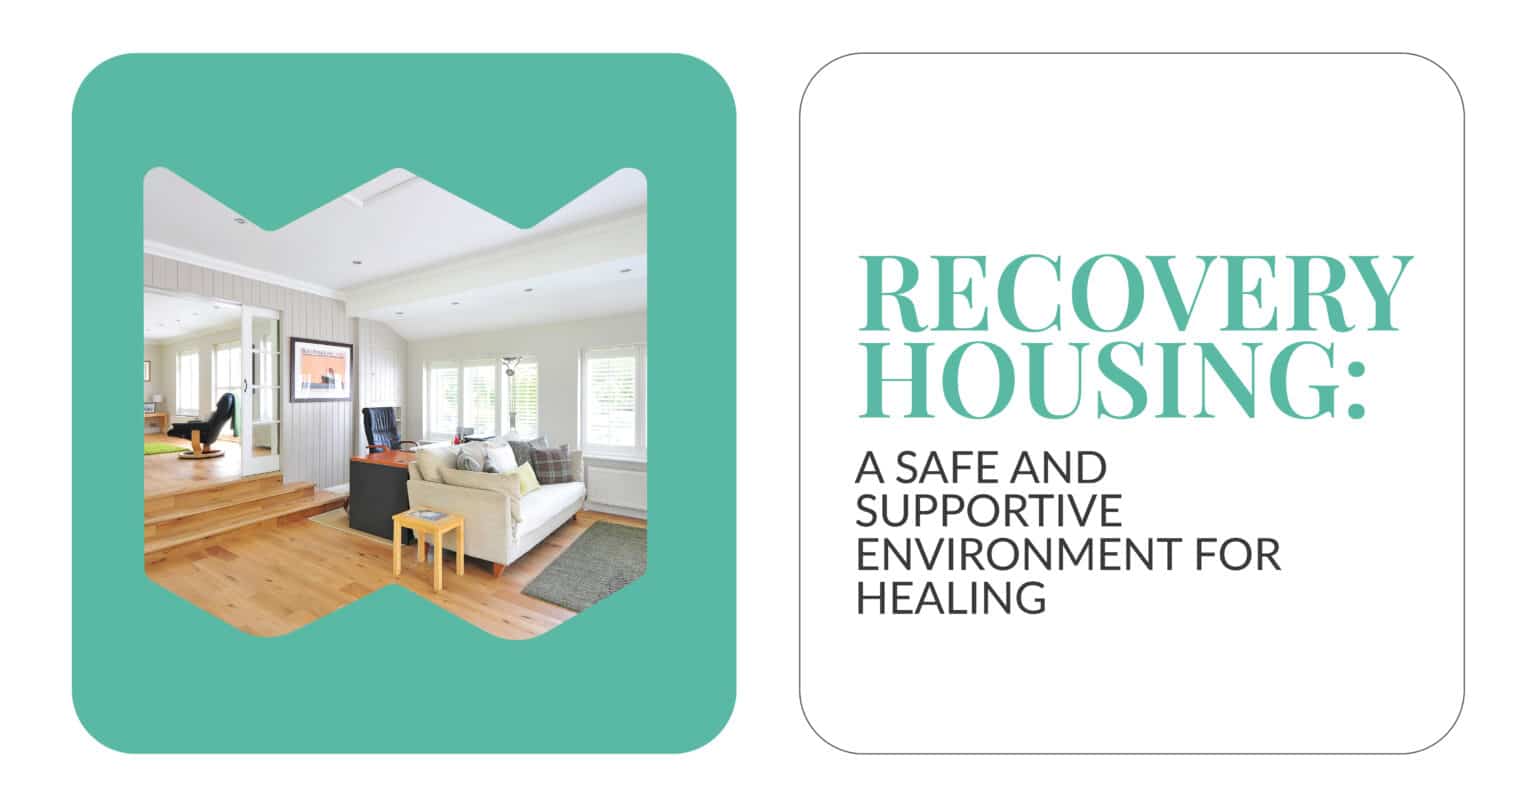 Recovery Housing in Rehabilitation